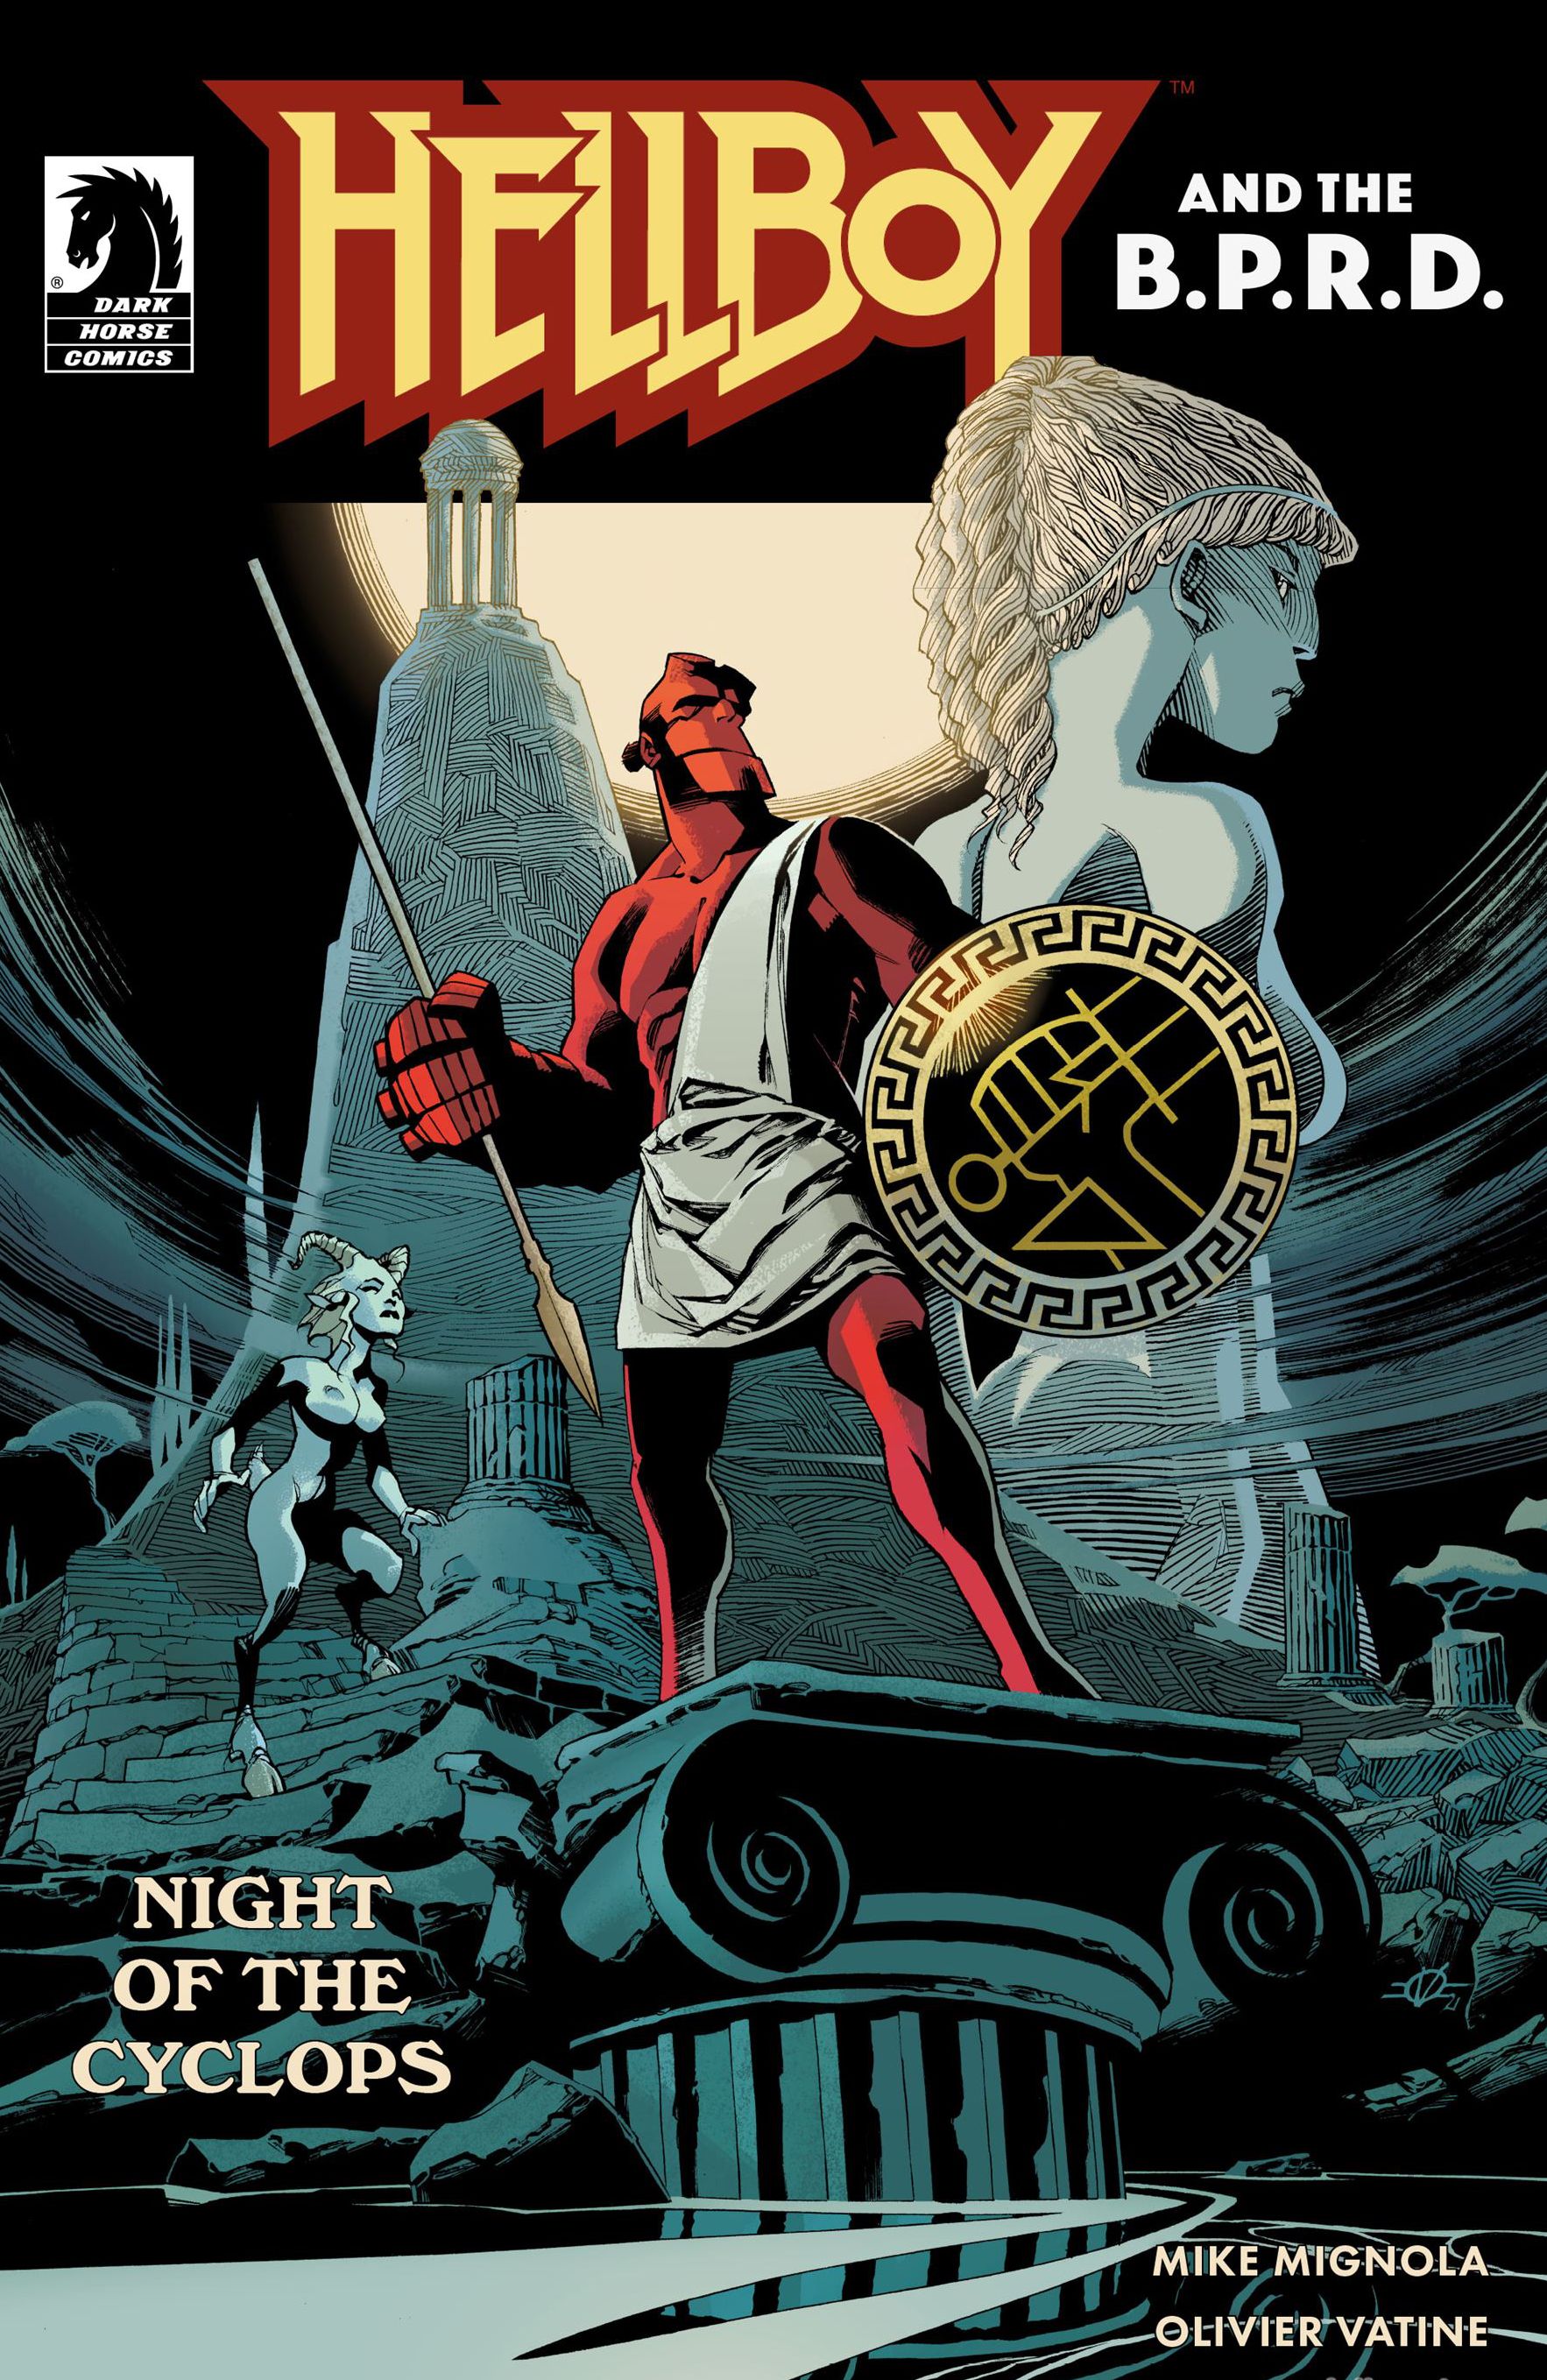 Hellboy and the BPRD Night of the Cyclops #1 Cover